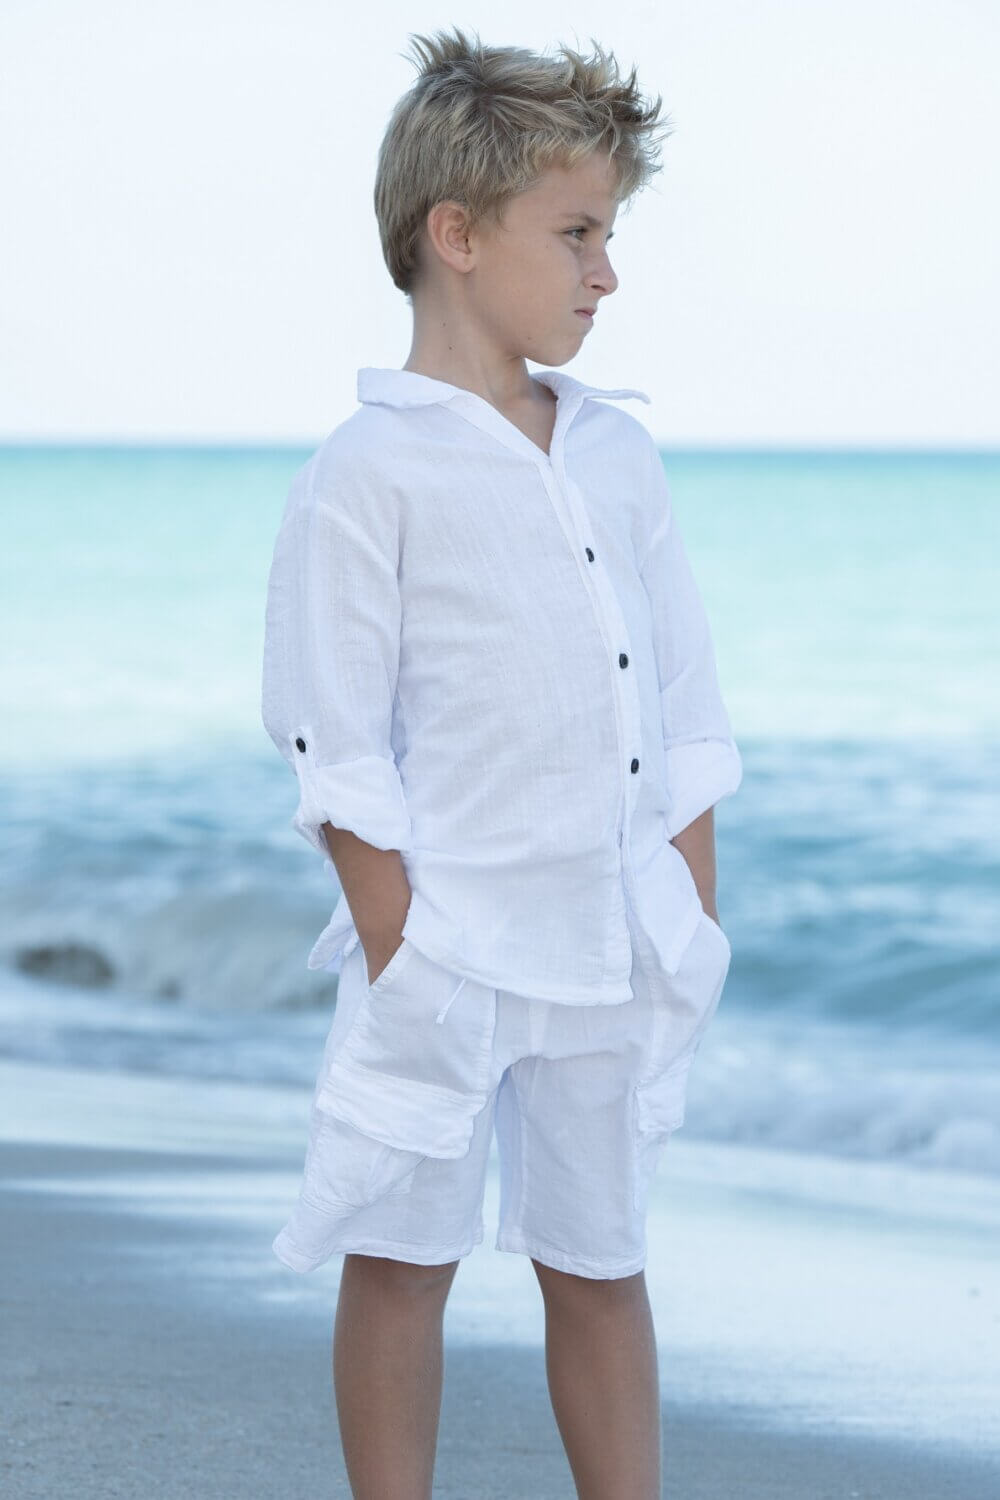 Boy on beach with white outfit